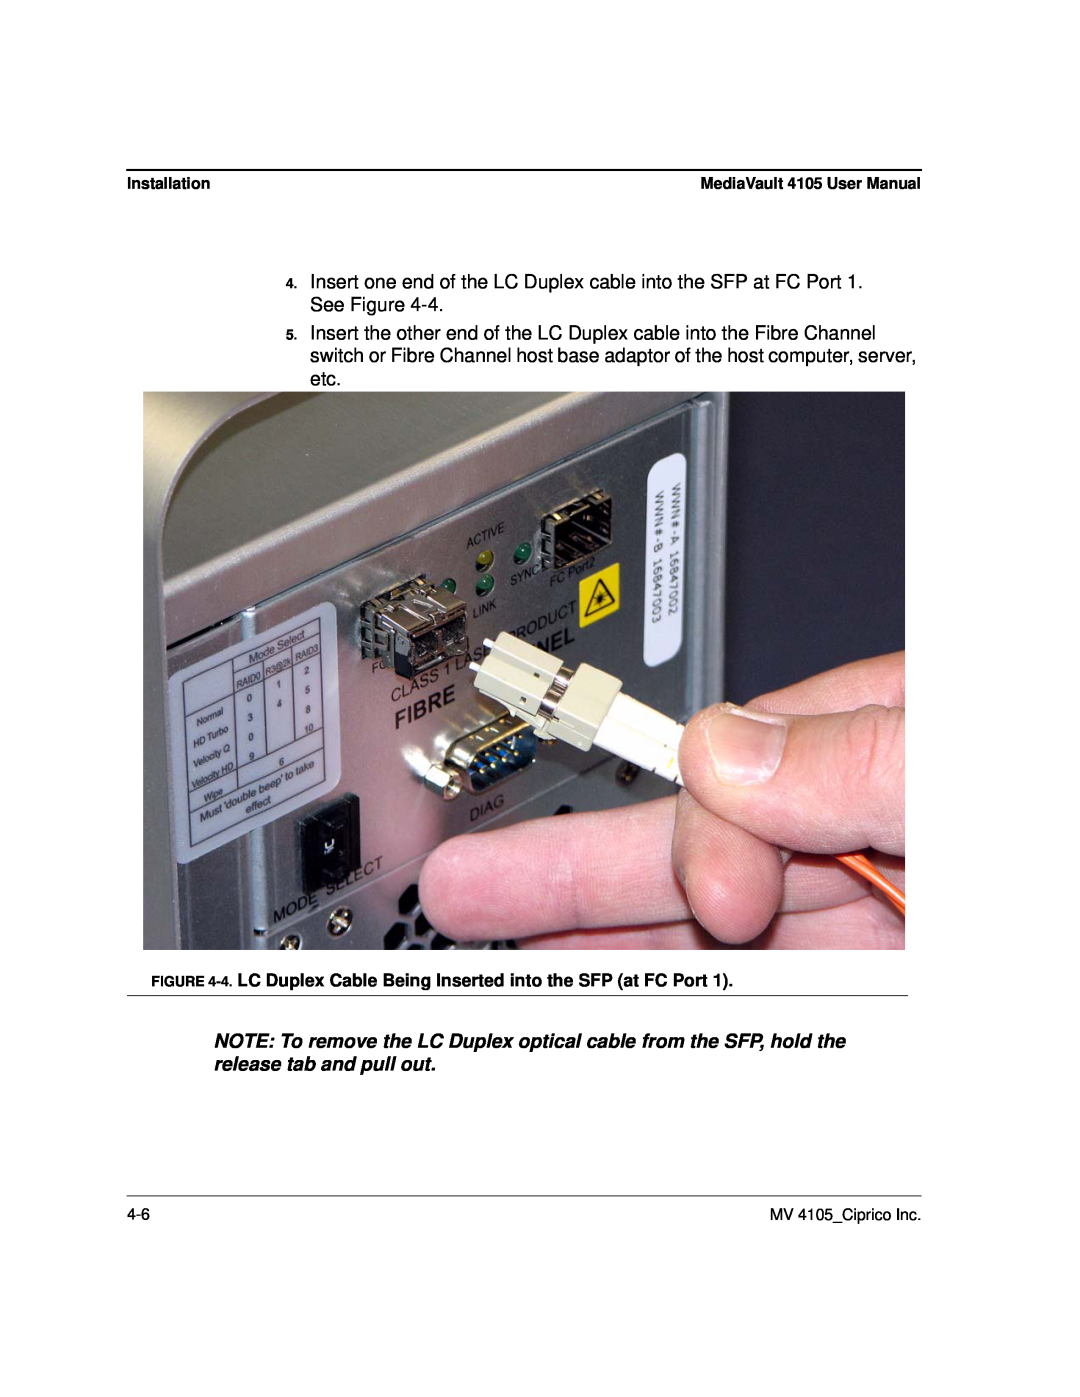 Ciprico 4105 Series user manual 4. LC Duplex Cable Being Inserted into the SFP at FC Port 